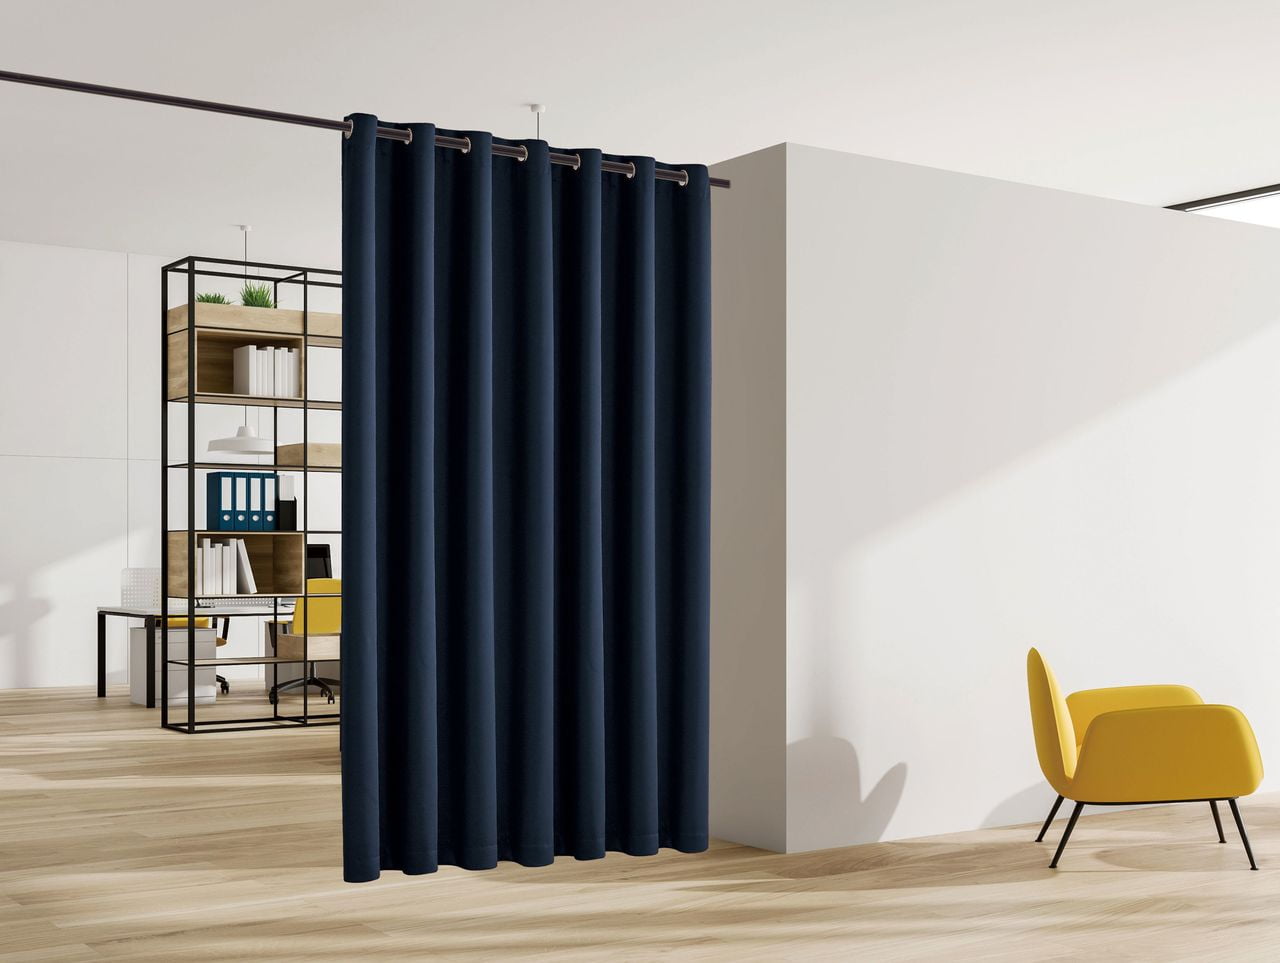 Blackout Room Divider Curtain Panel Privacy Partition Heavyweight Premium  Fabric Thermal Insulated